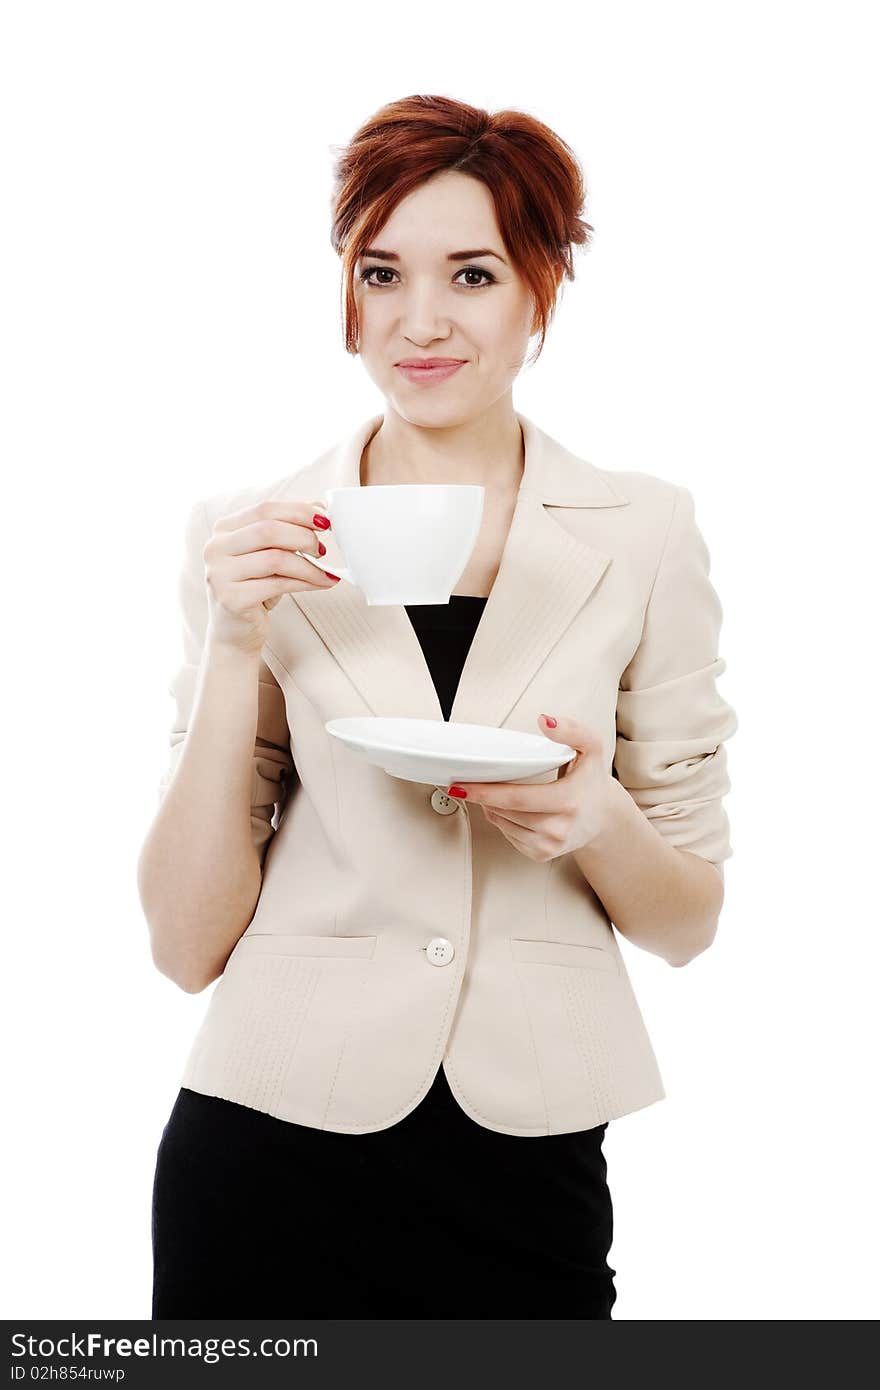 Girl with cup of tea/coffee isolated on white